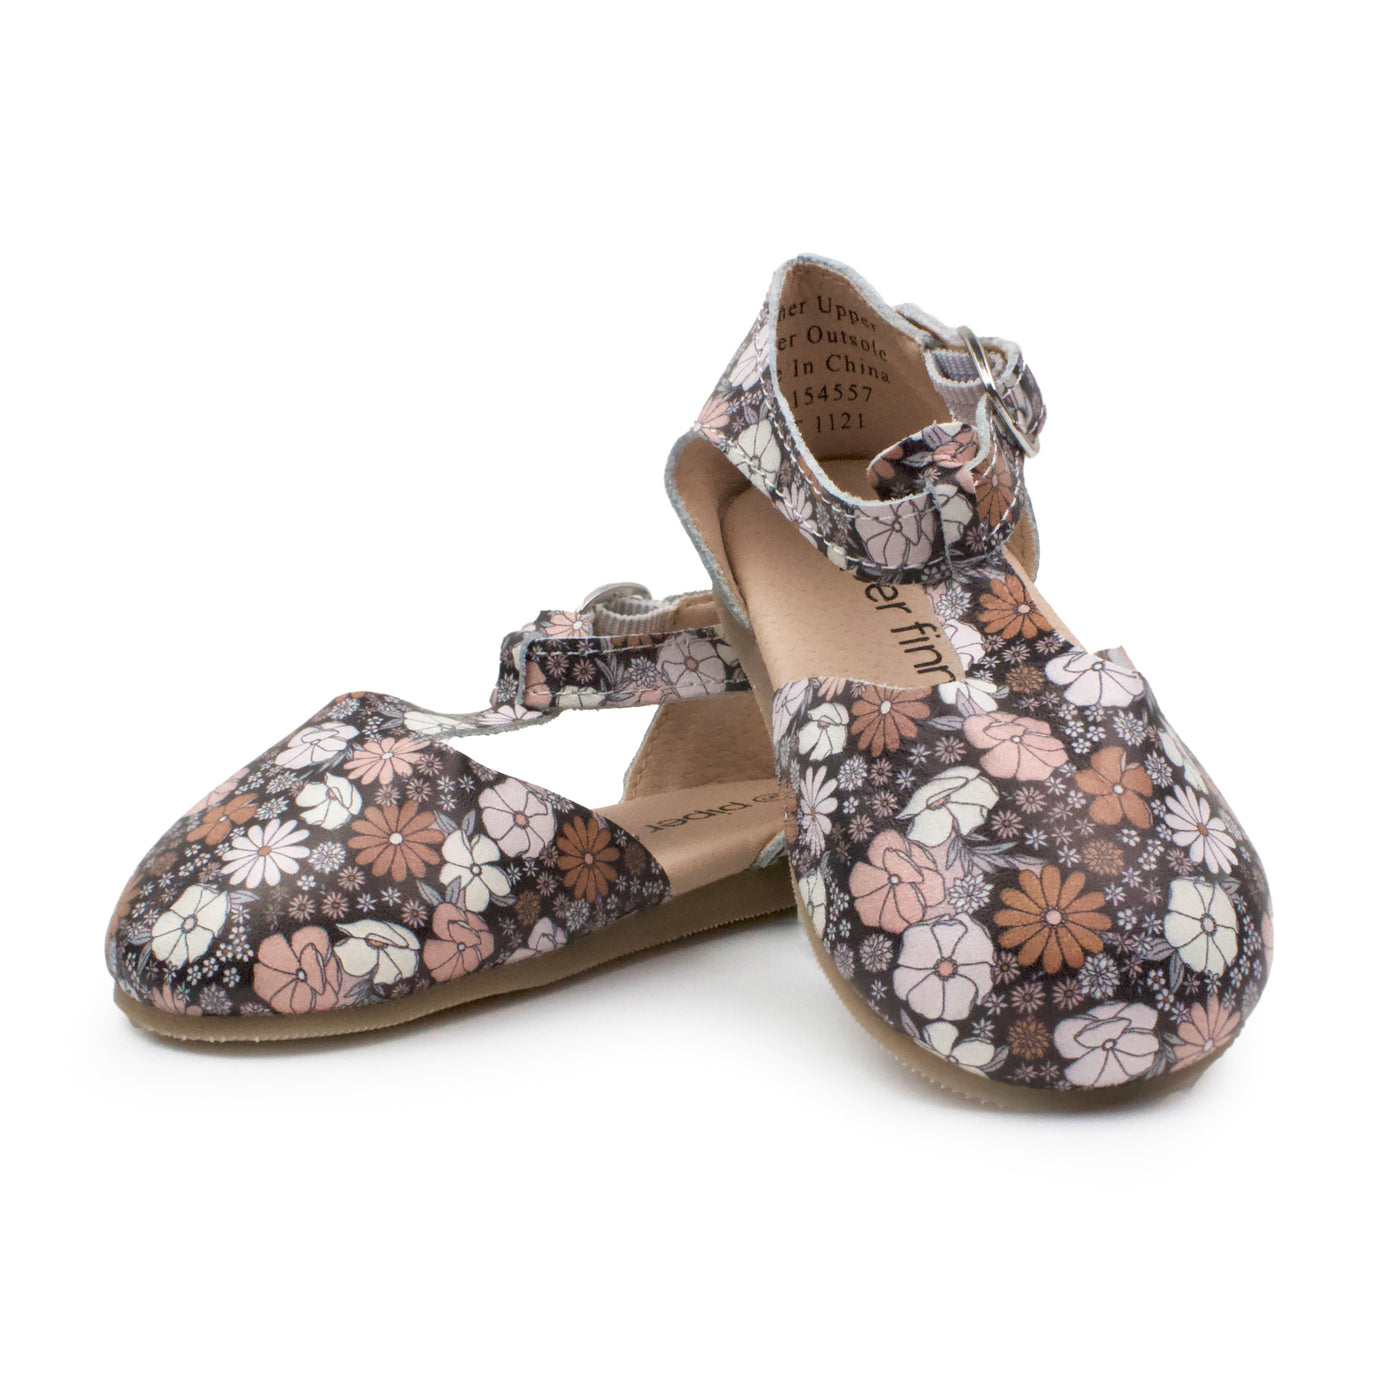 Black Floral - Mary Jane - Hard Sole